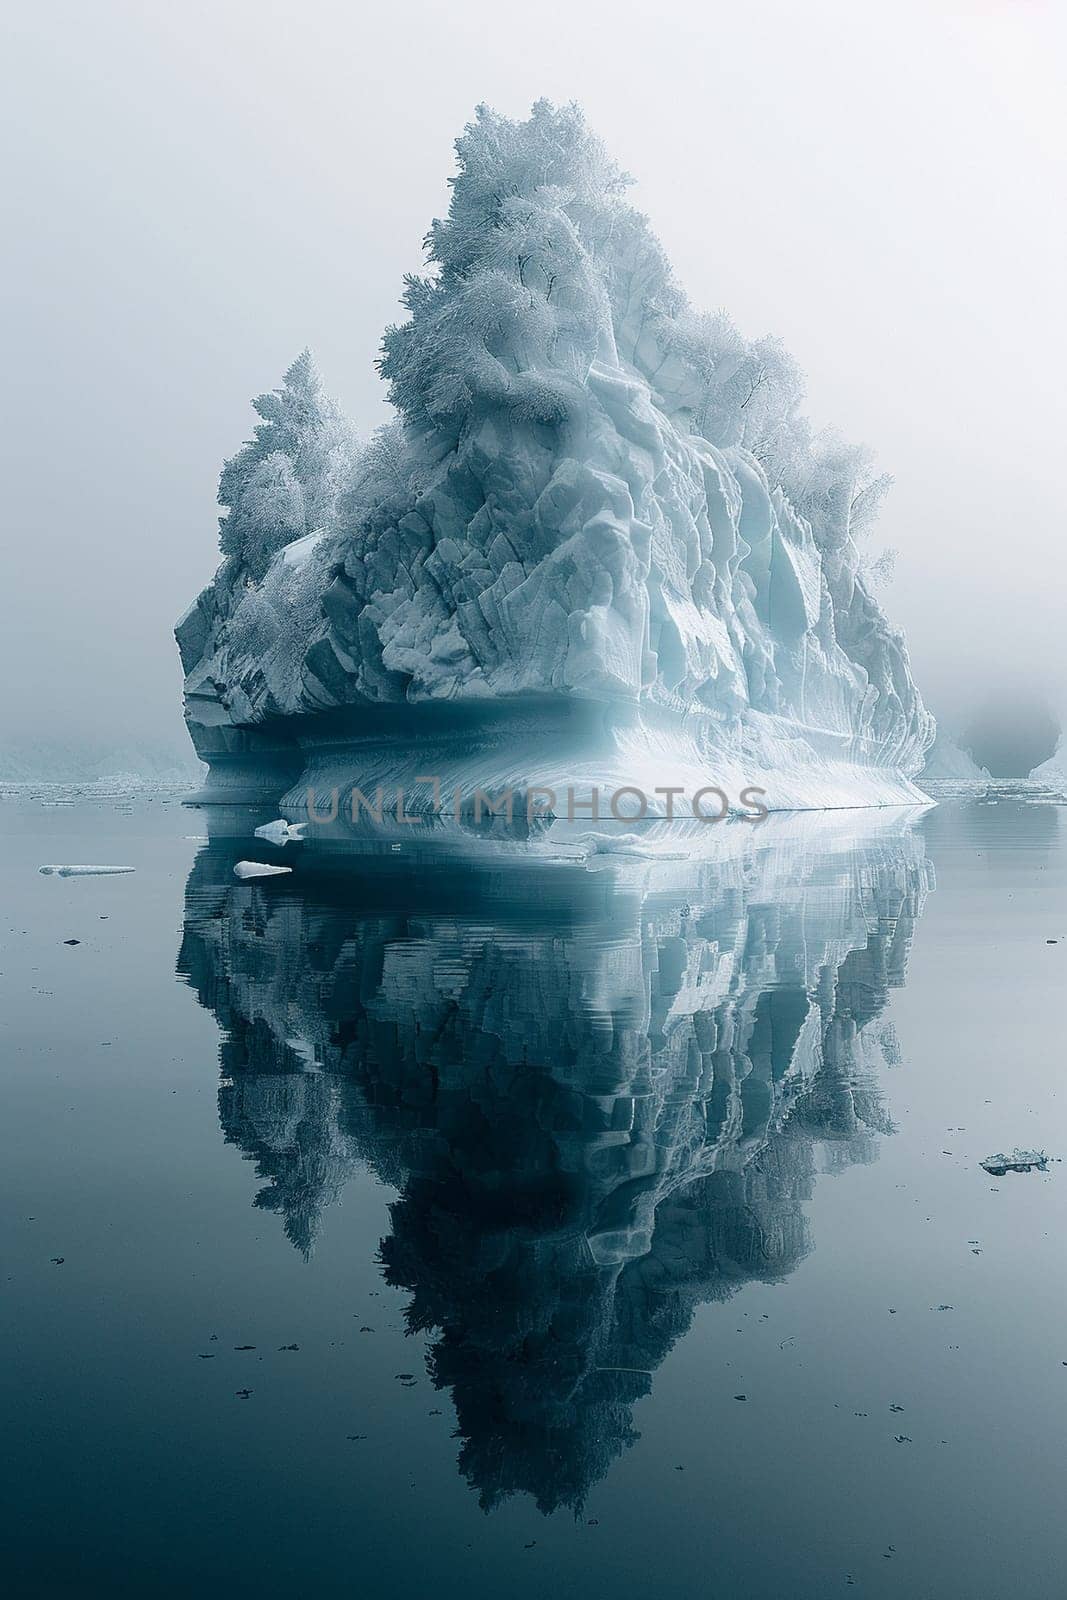 Icebergs floating in a glacial lagoon, symbolizing the cold beauty and changing climate.